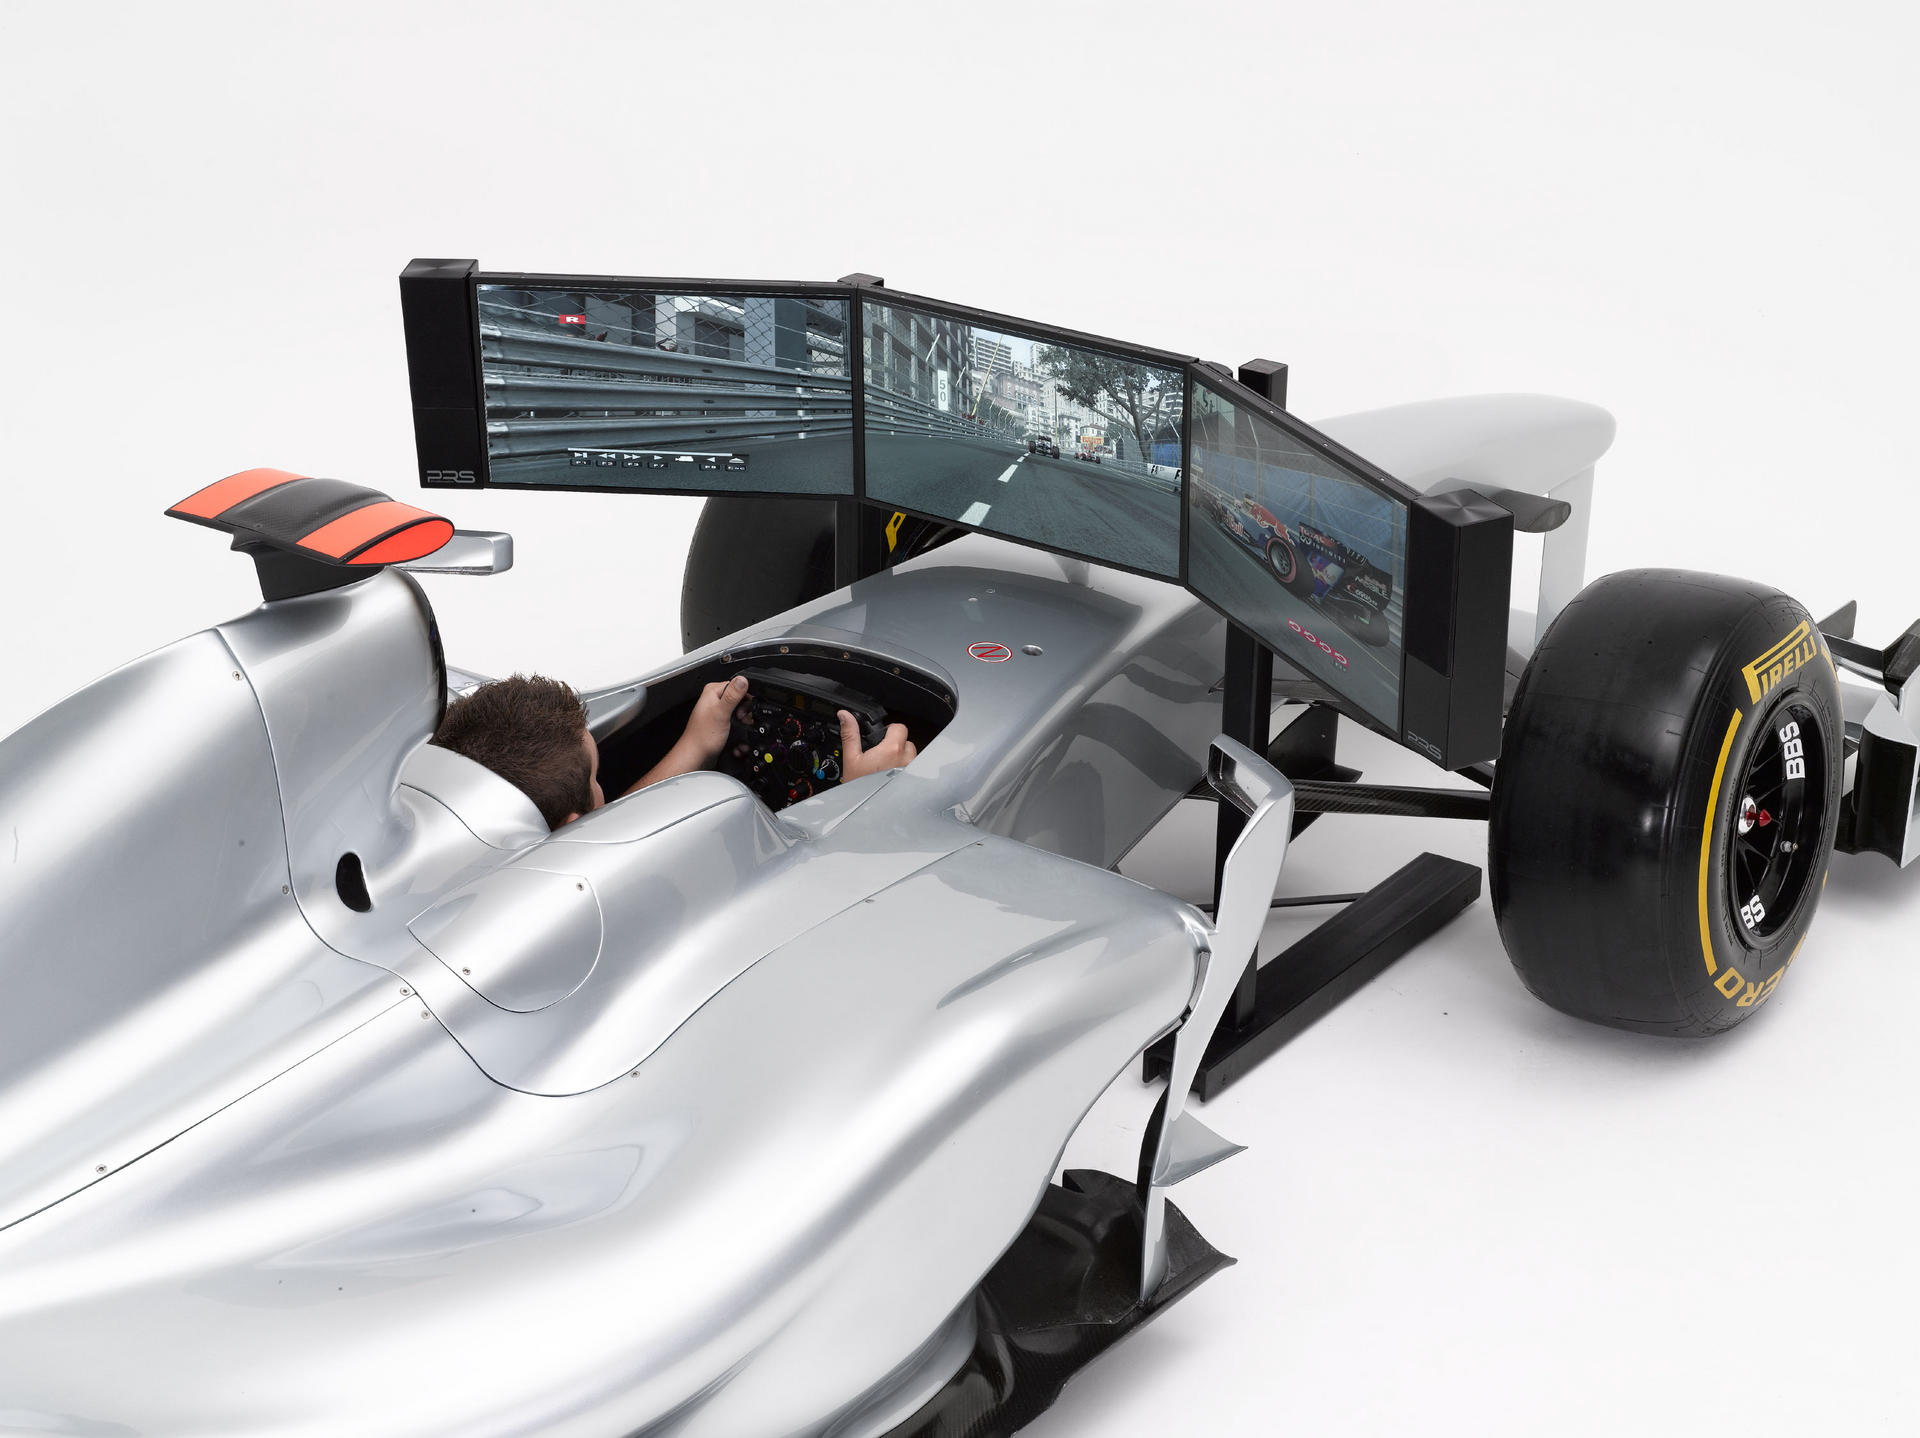 FMCG InternationalThis racing car simulator (car and monitor included) offers the ultimate driving experience, HK$895,000